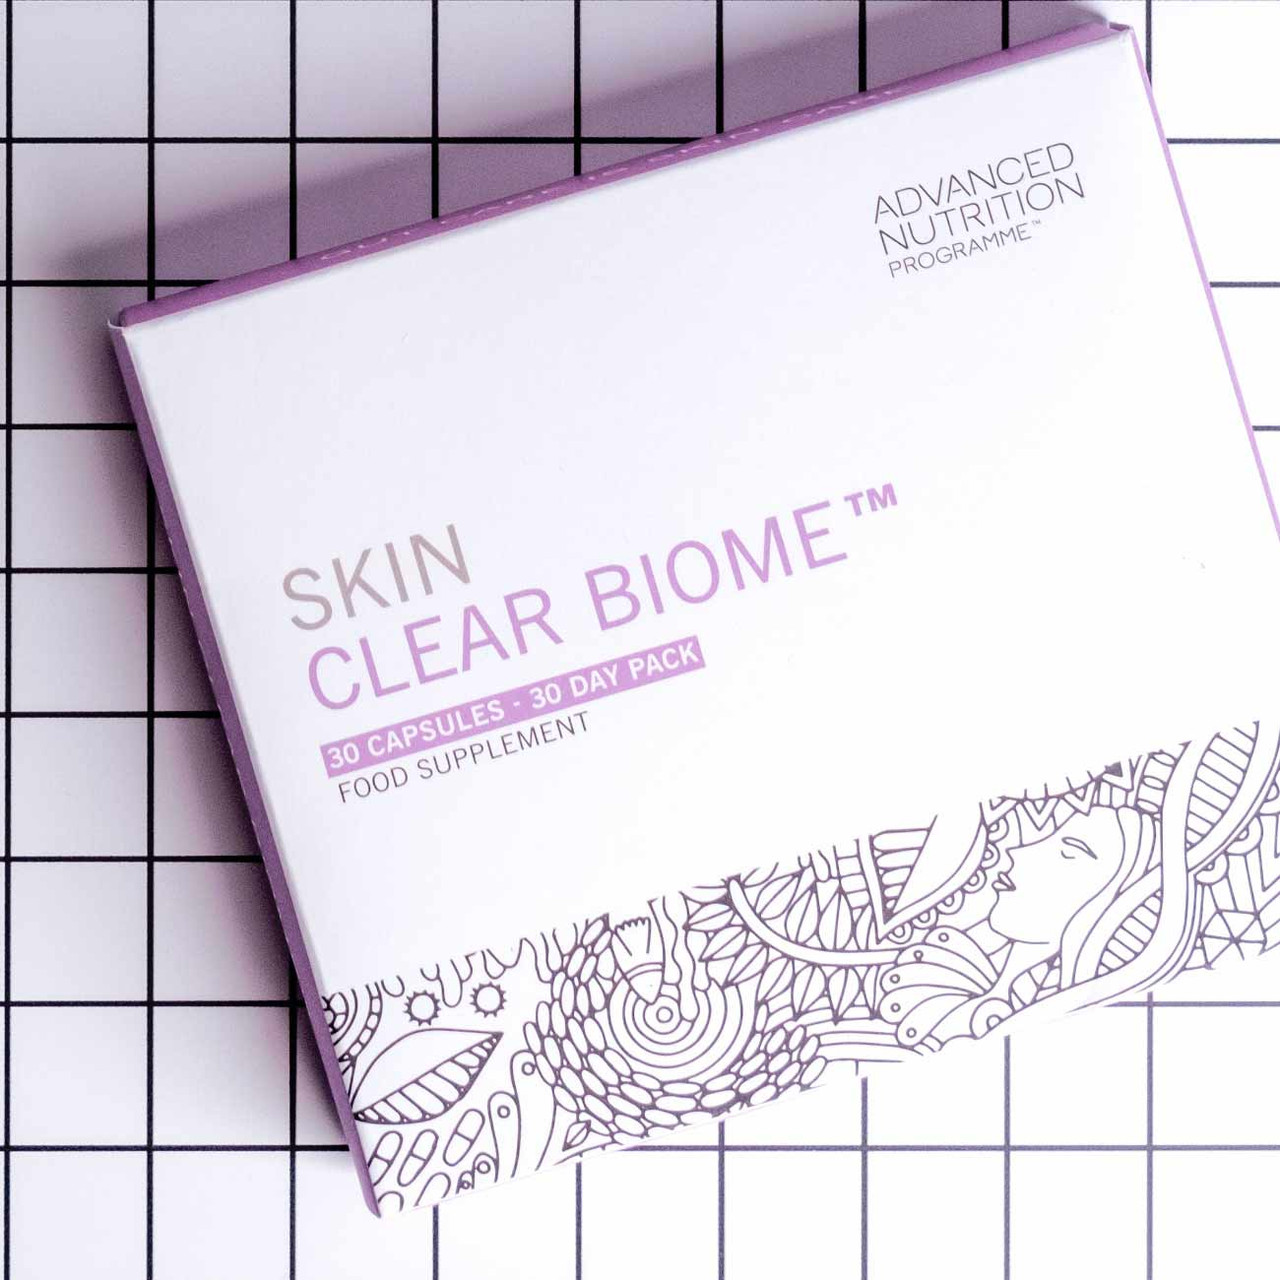 Skin Clear Biome - The Londons May Fair Clinic